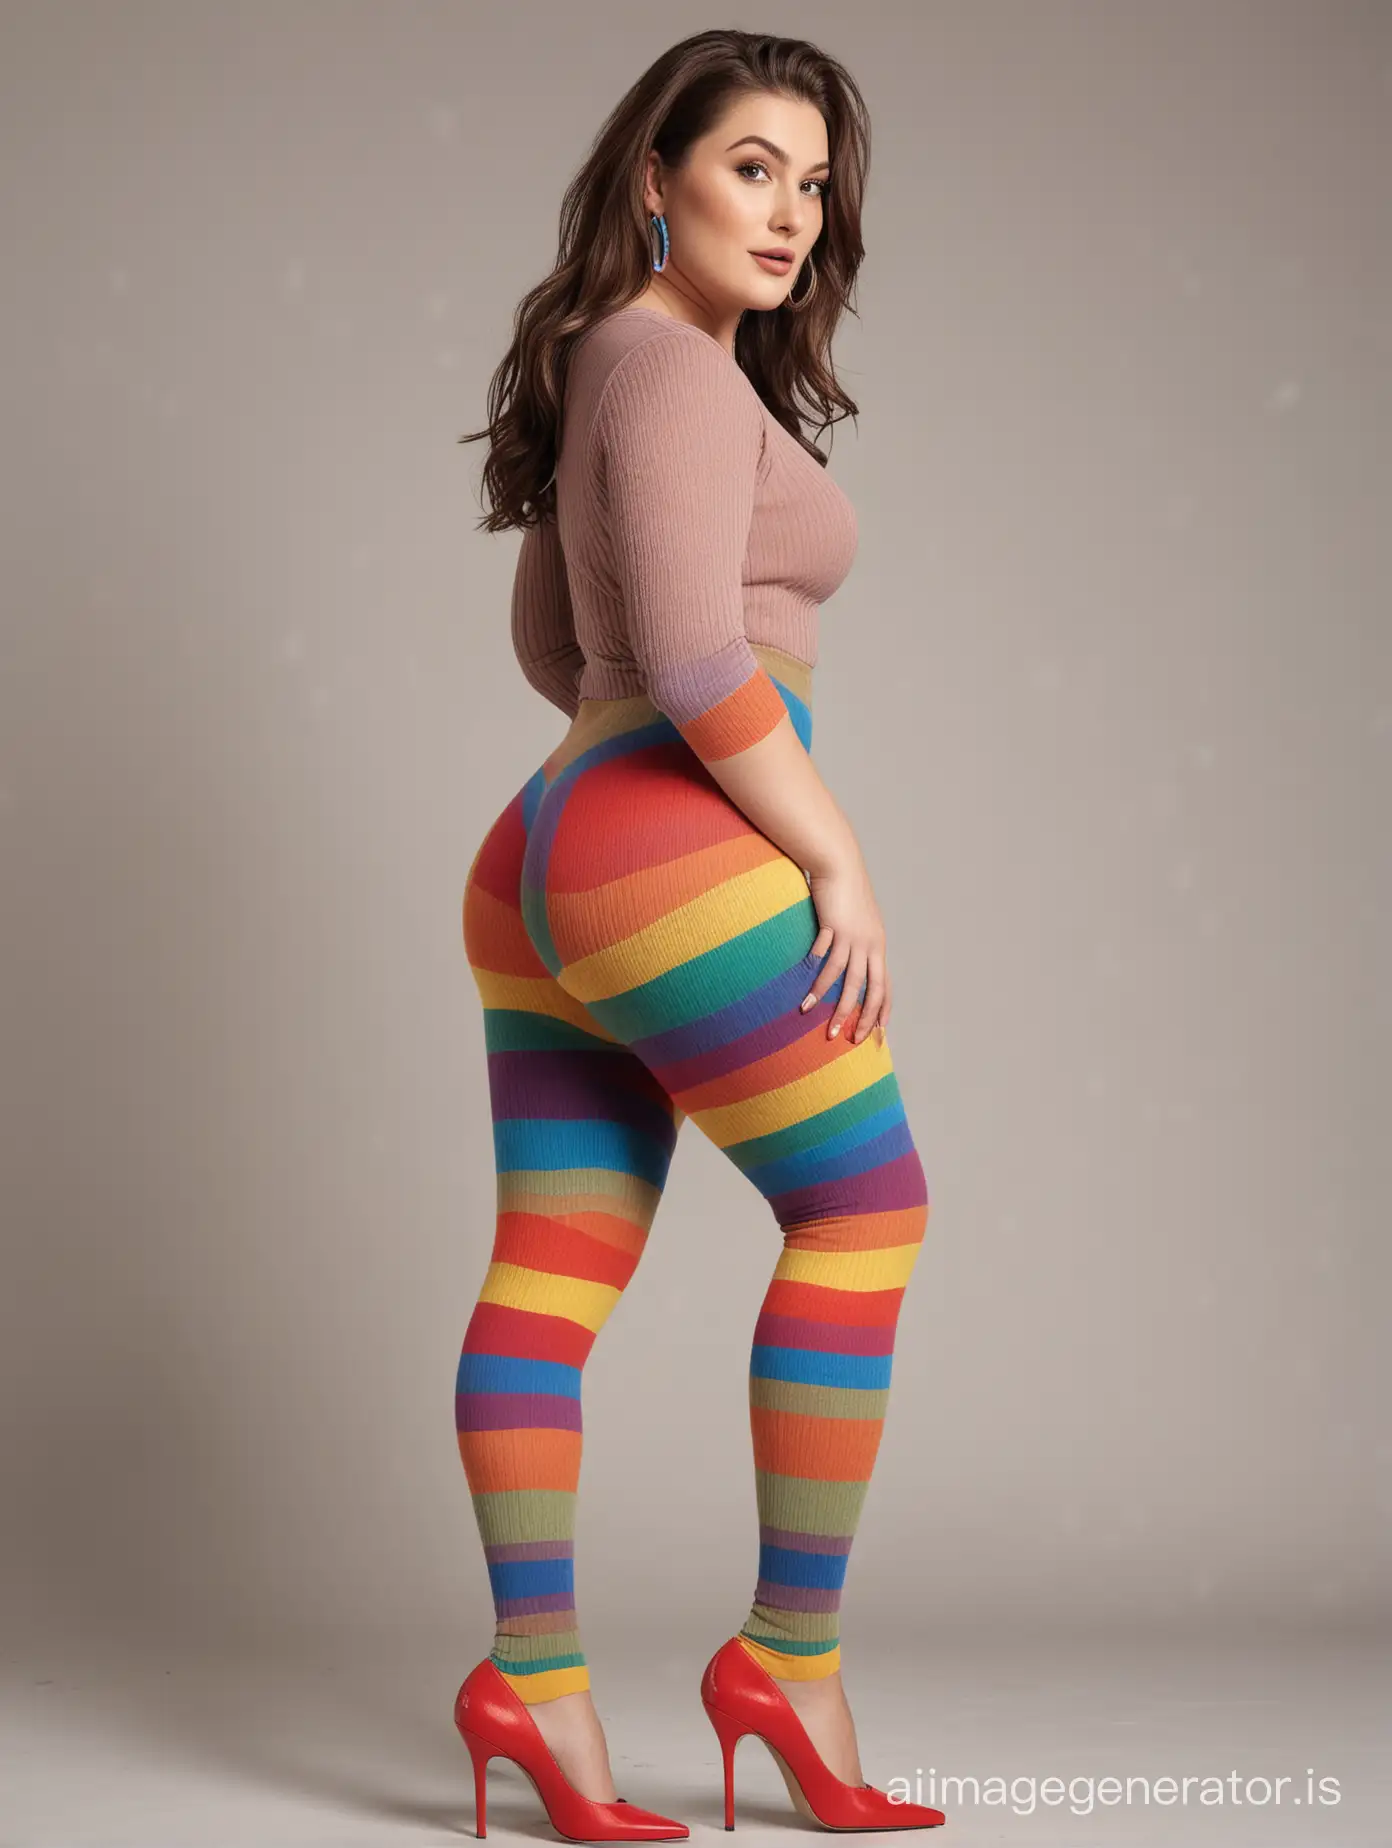 Curvy-Woman-in-Extra-Thick-Rainbow-Wool-Tights-and-High-Heels